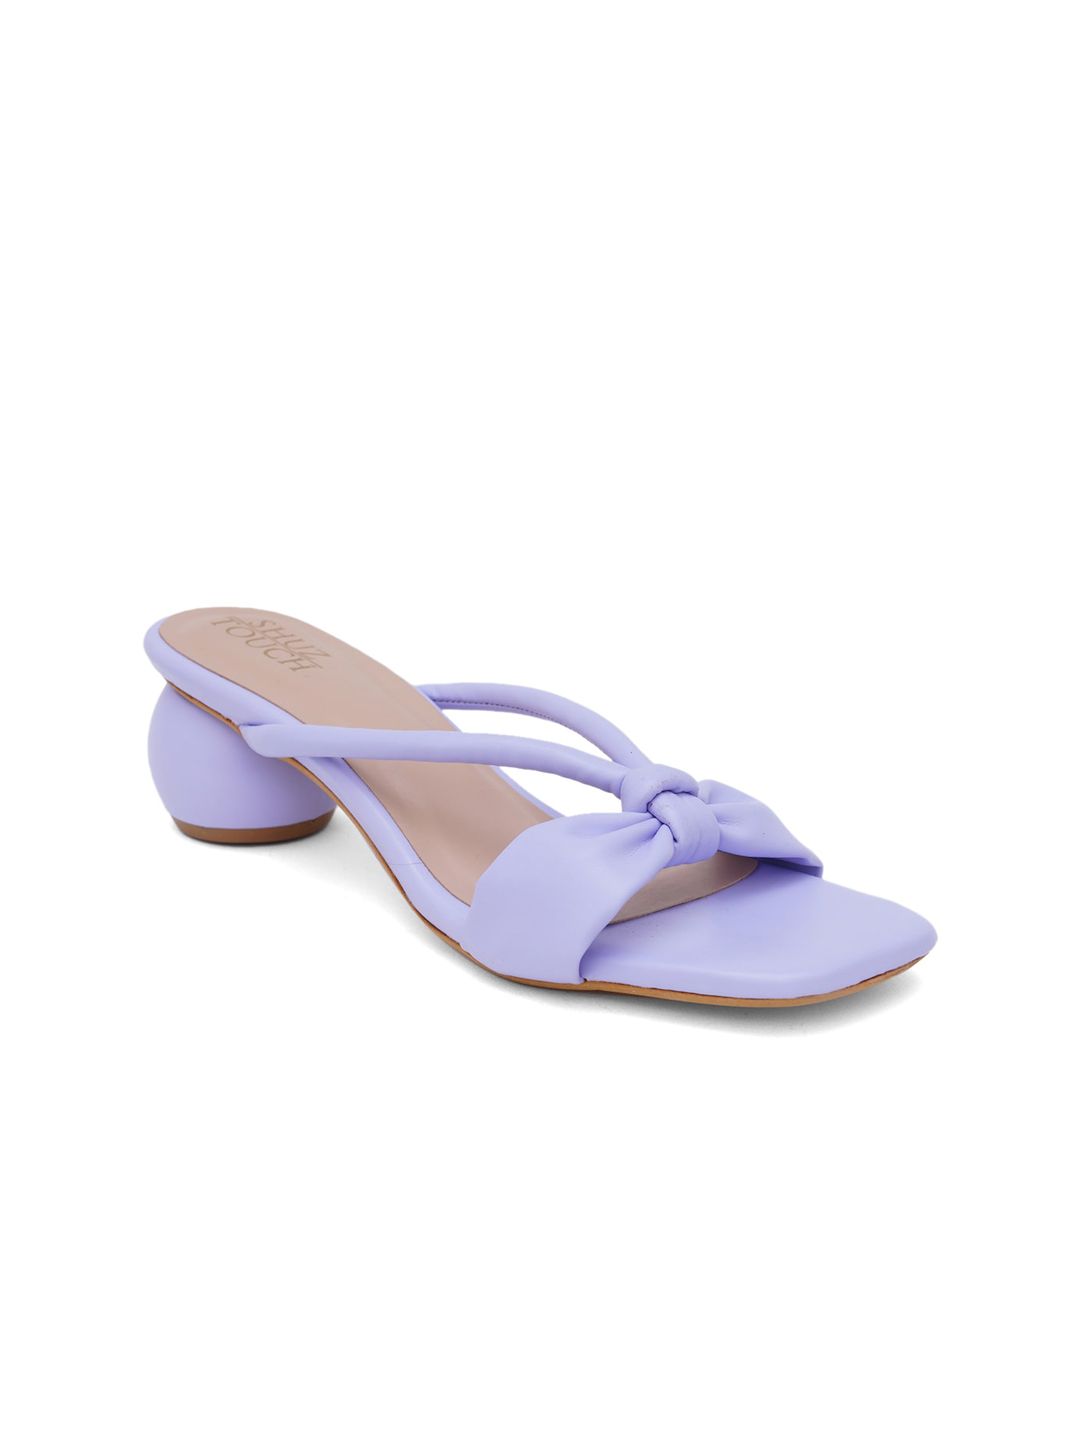 SHUZ TOUCH Purple Block Mules with Bows Price in India